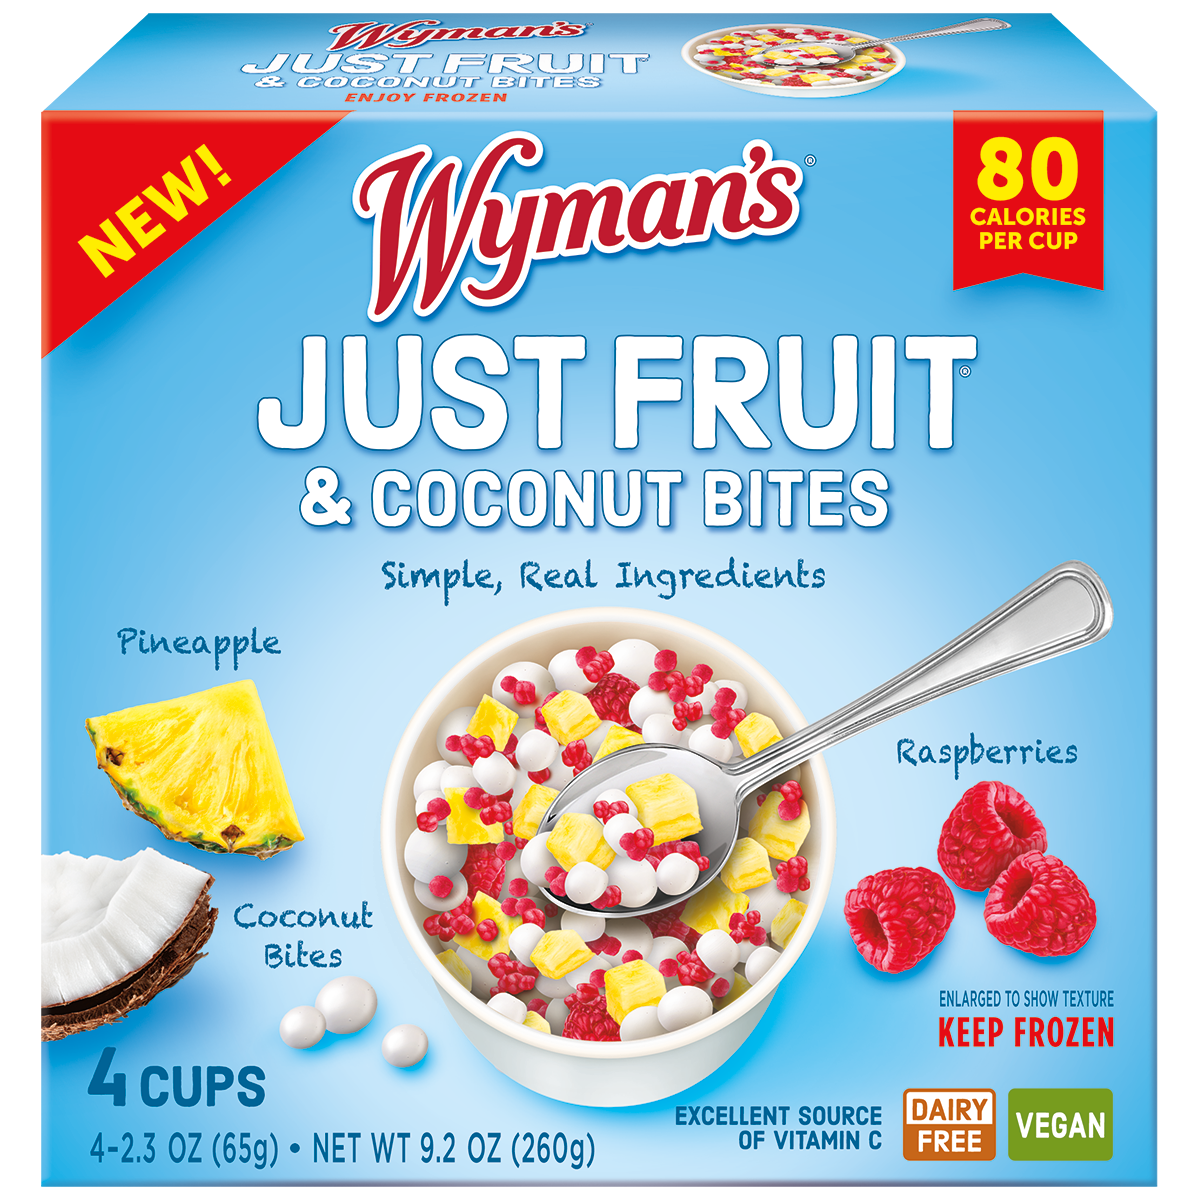 A box of Shop Wyman's Just Fruit - Coconut Bites with Pineapple.